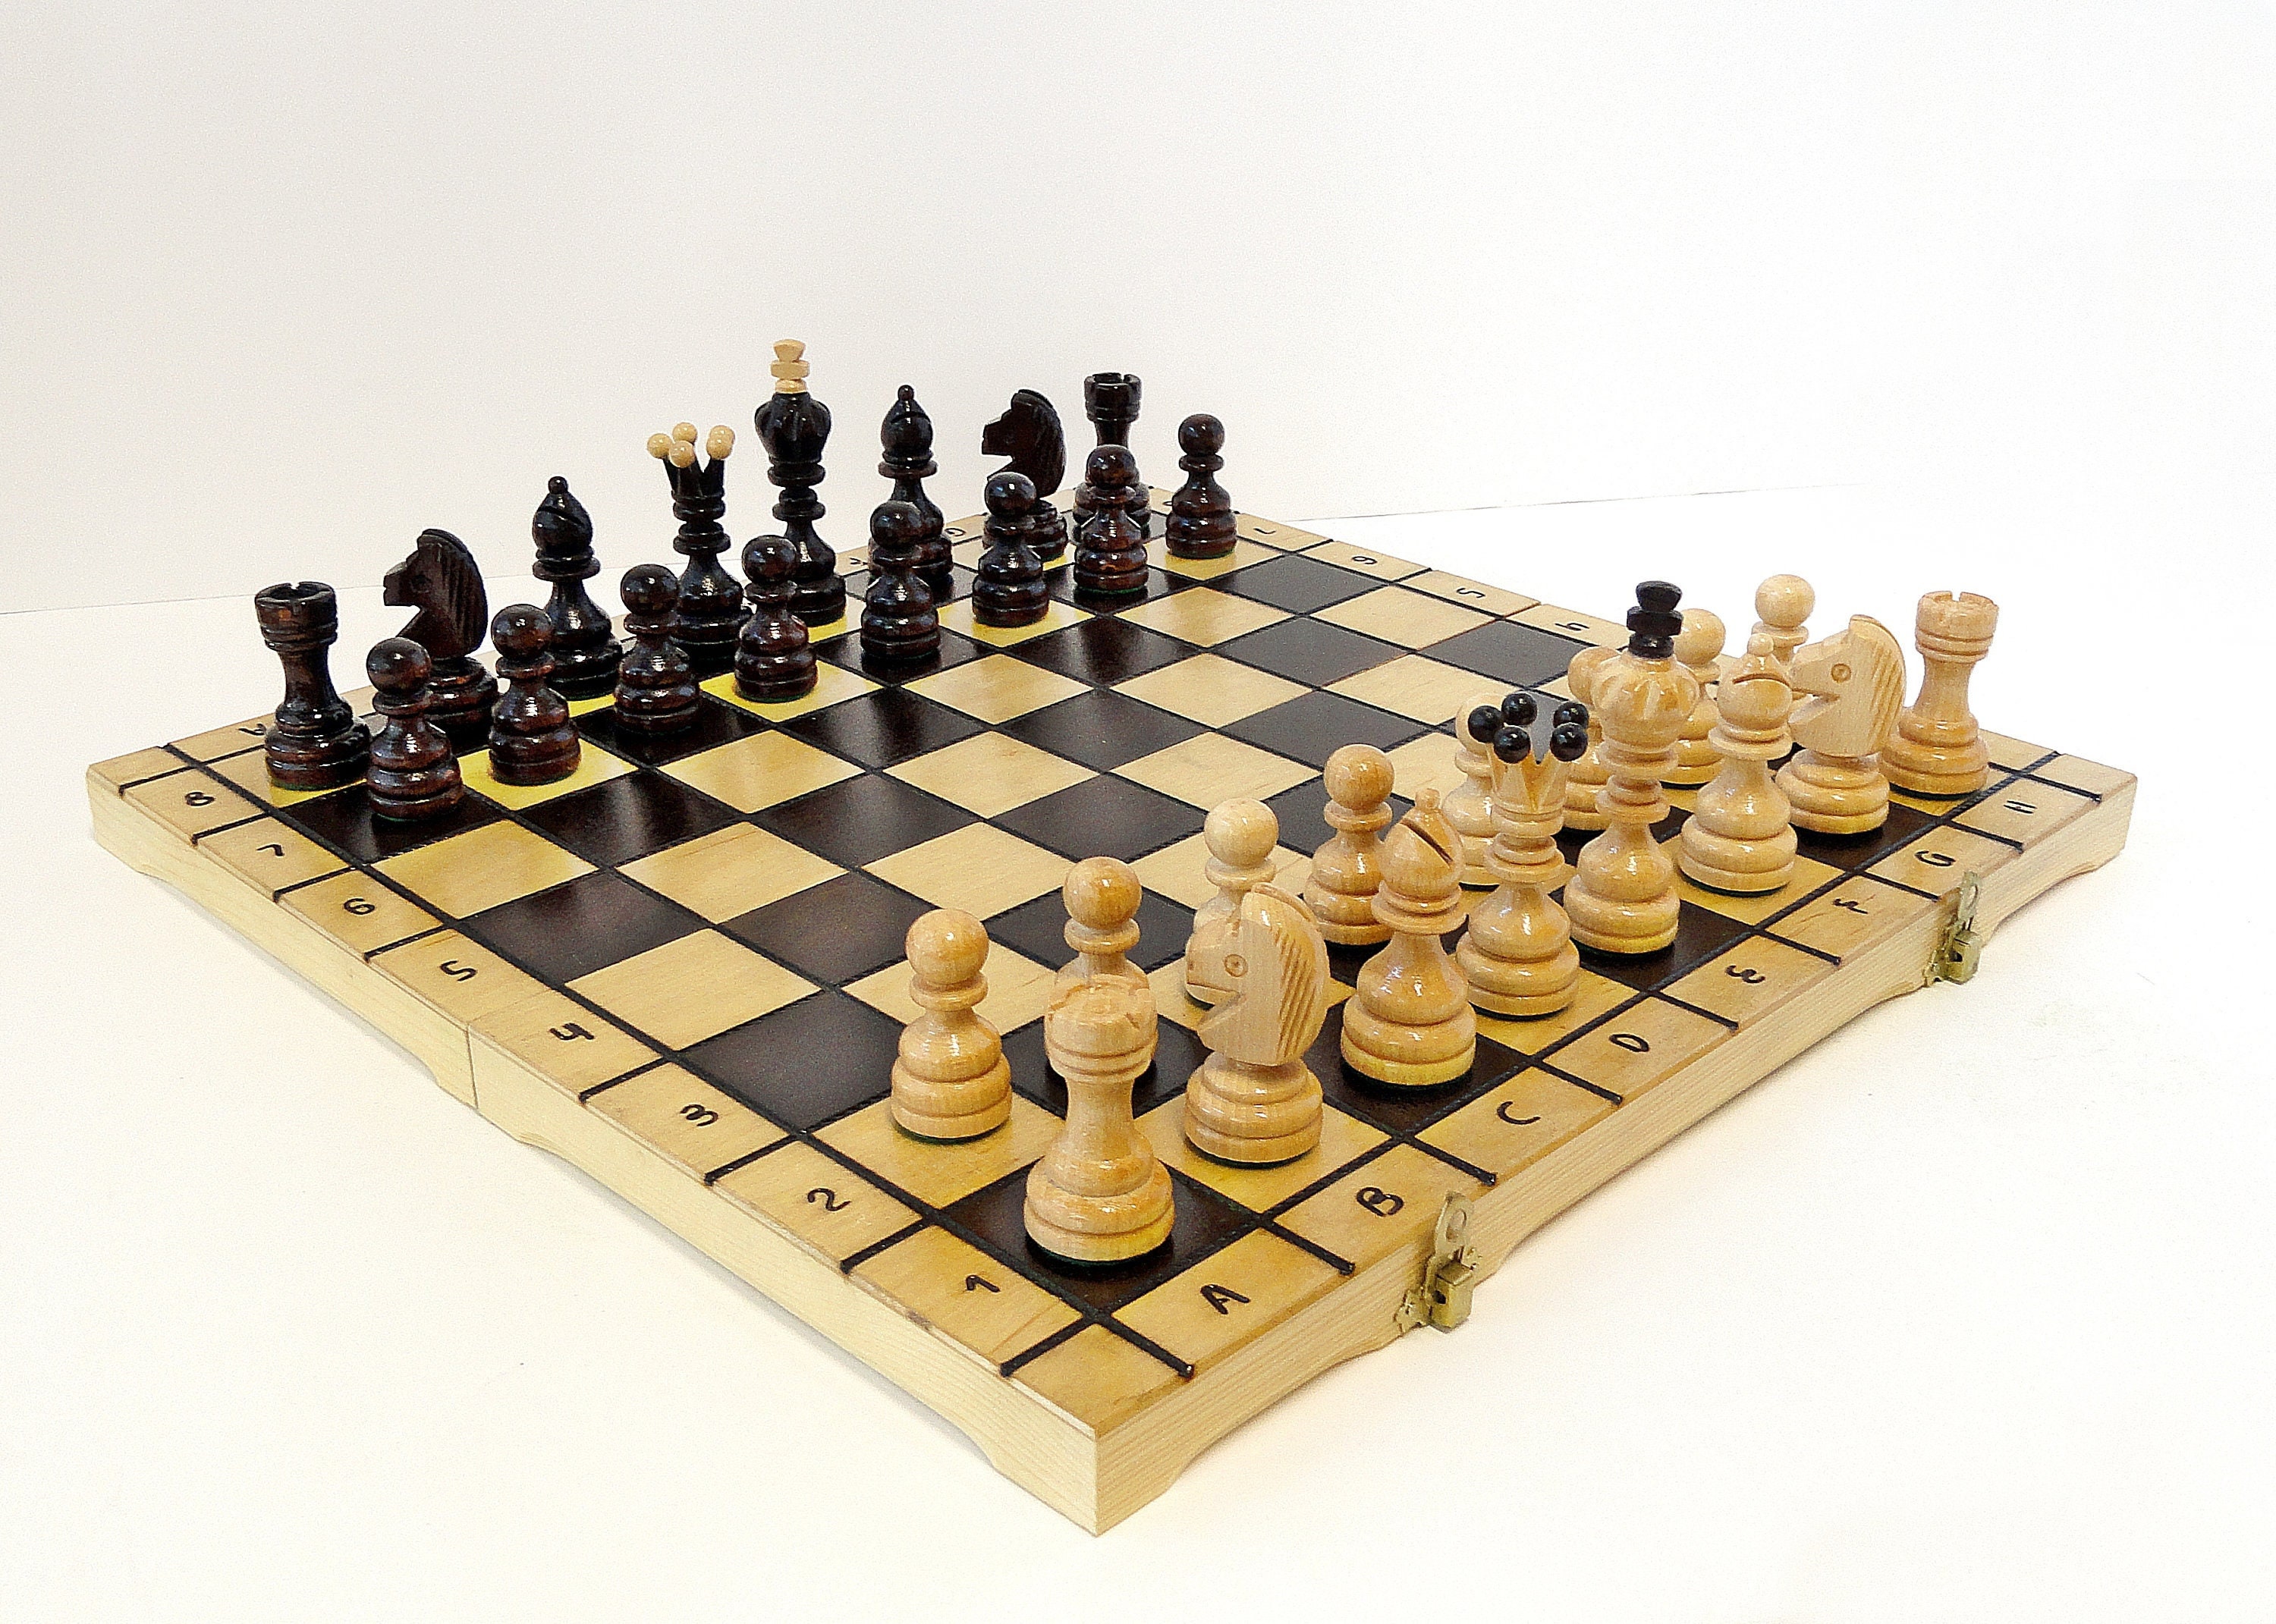 Tournament Chess Set - Extra Large & Heavy 4 inch Luxury Chess Pieces with Brown/White Roll-Up Chess Board